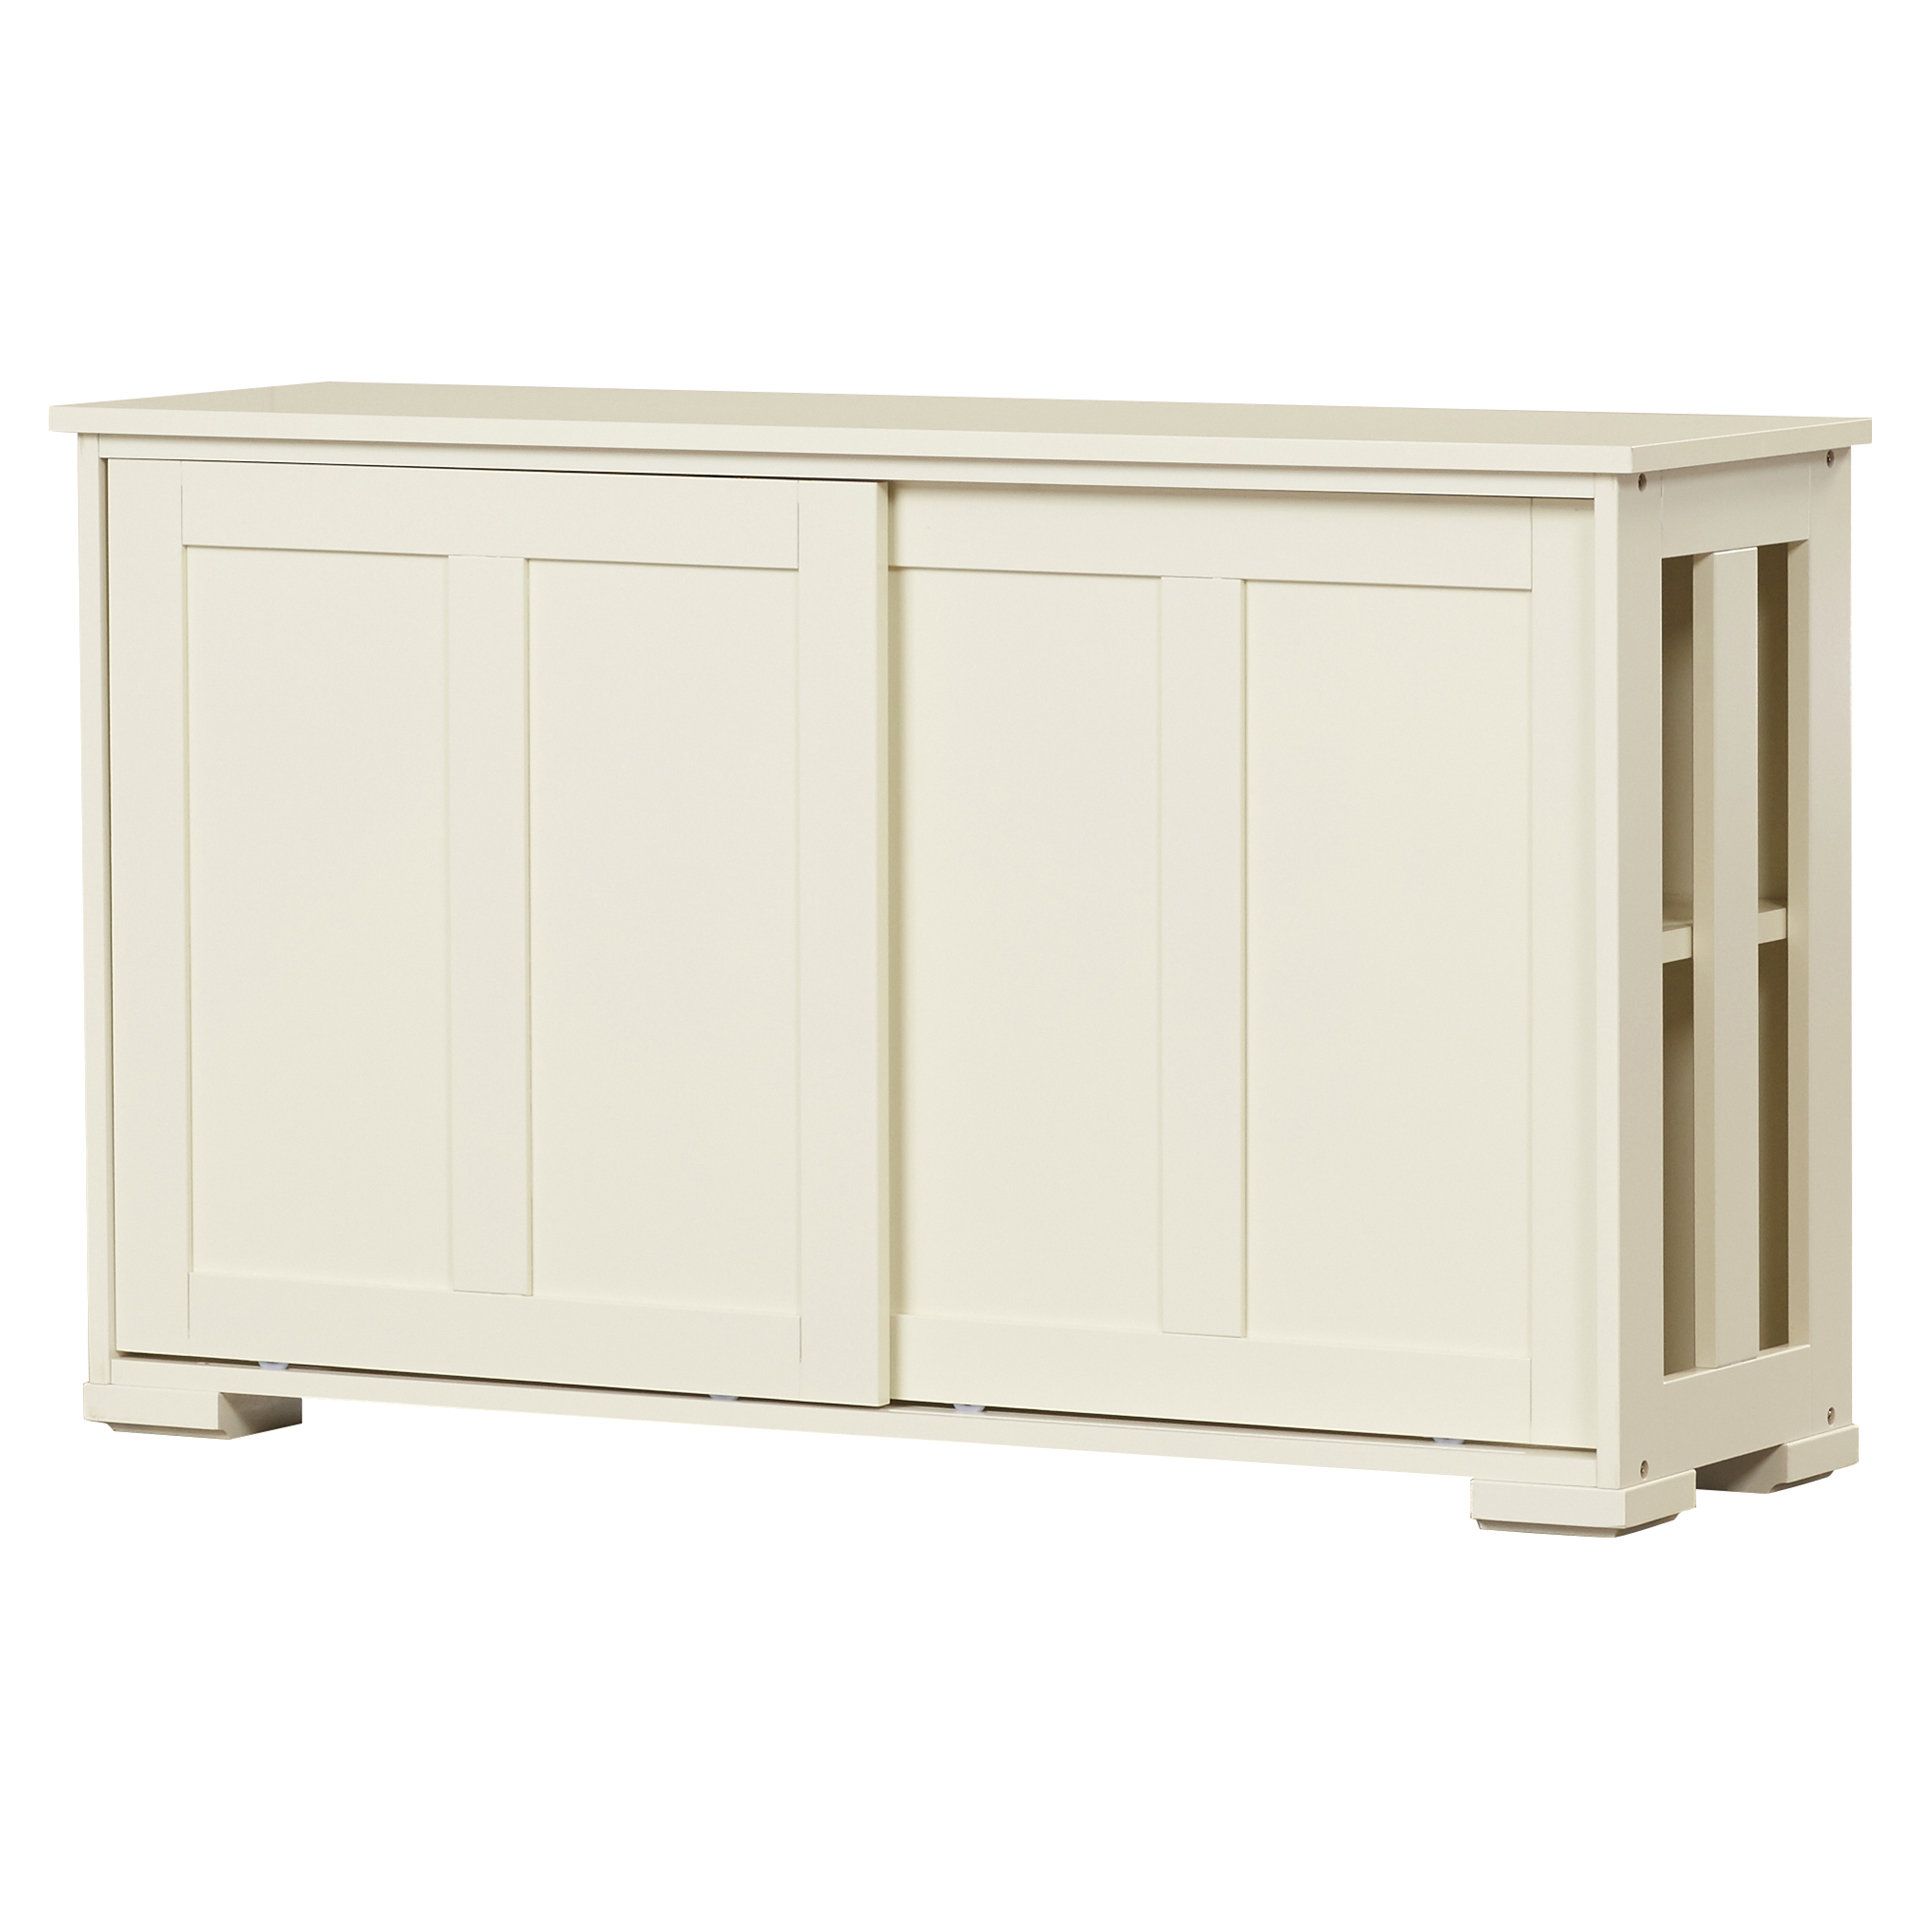 Sideboards & Credenzas | Joss & Main Pertaining To Current Lainey Credenzas (View 20 of 20)